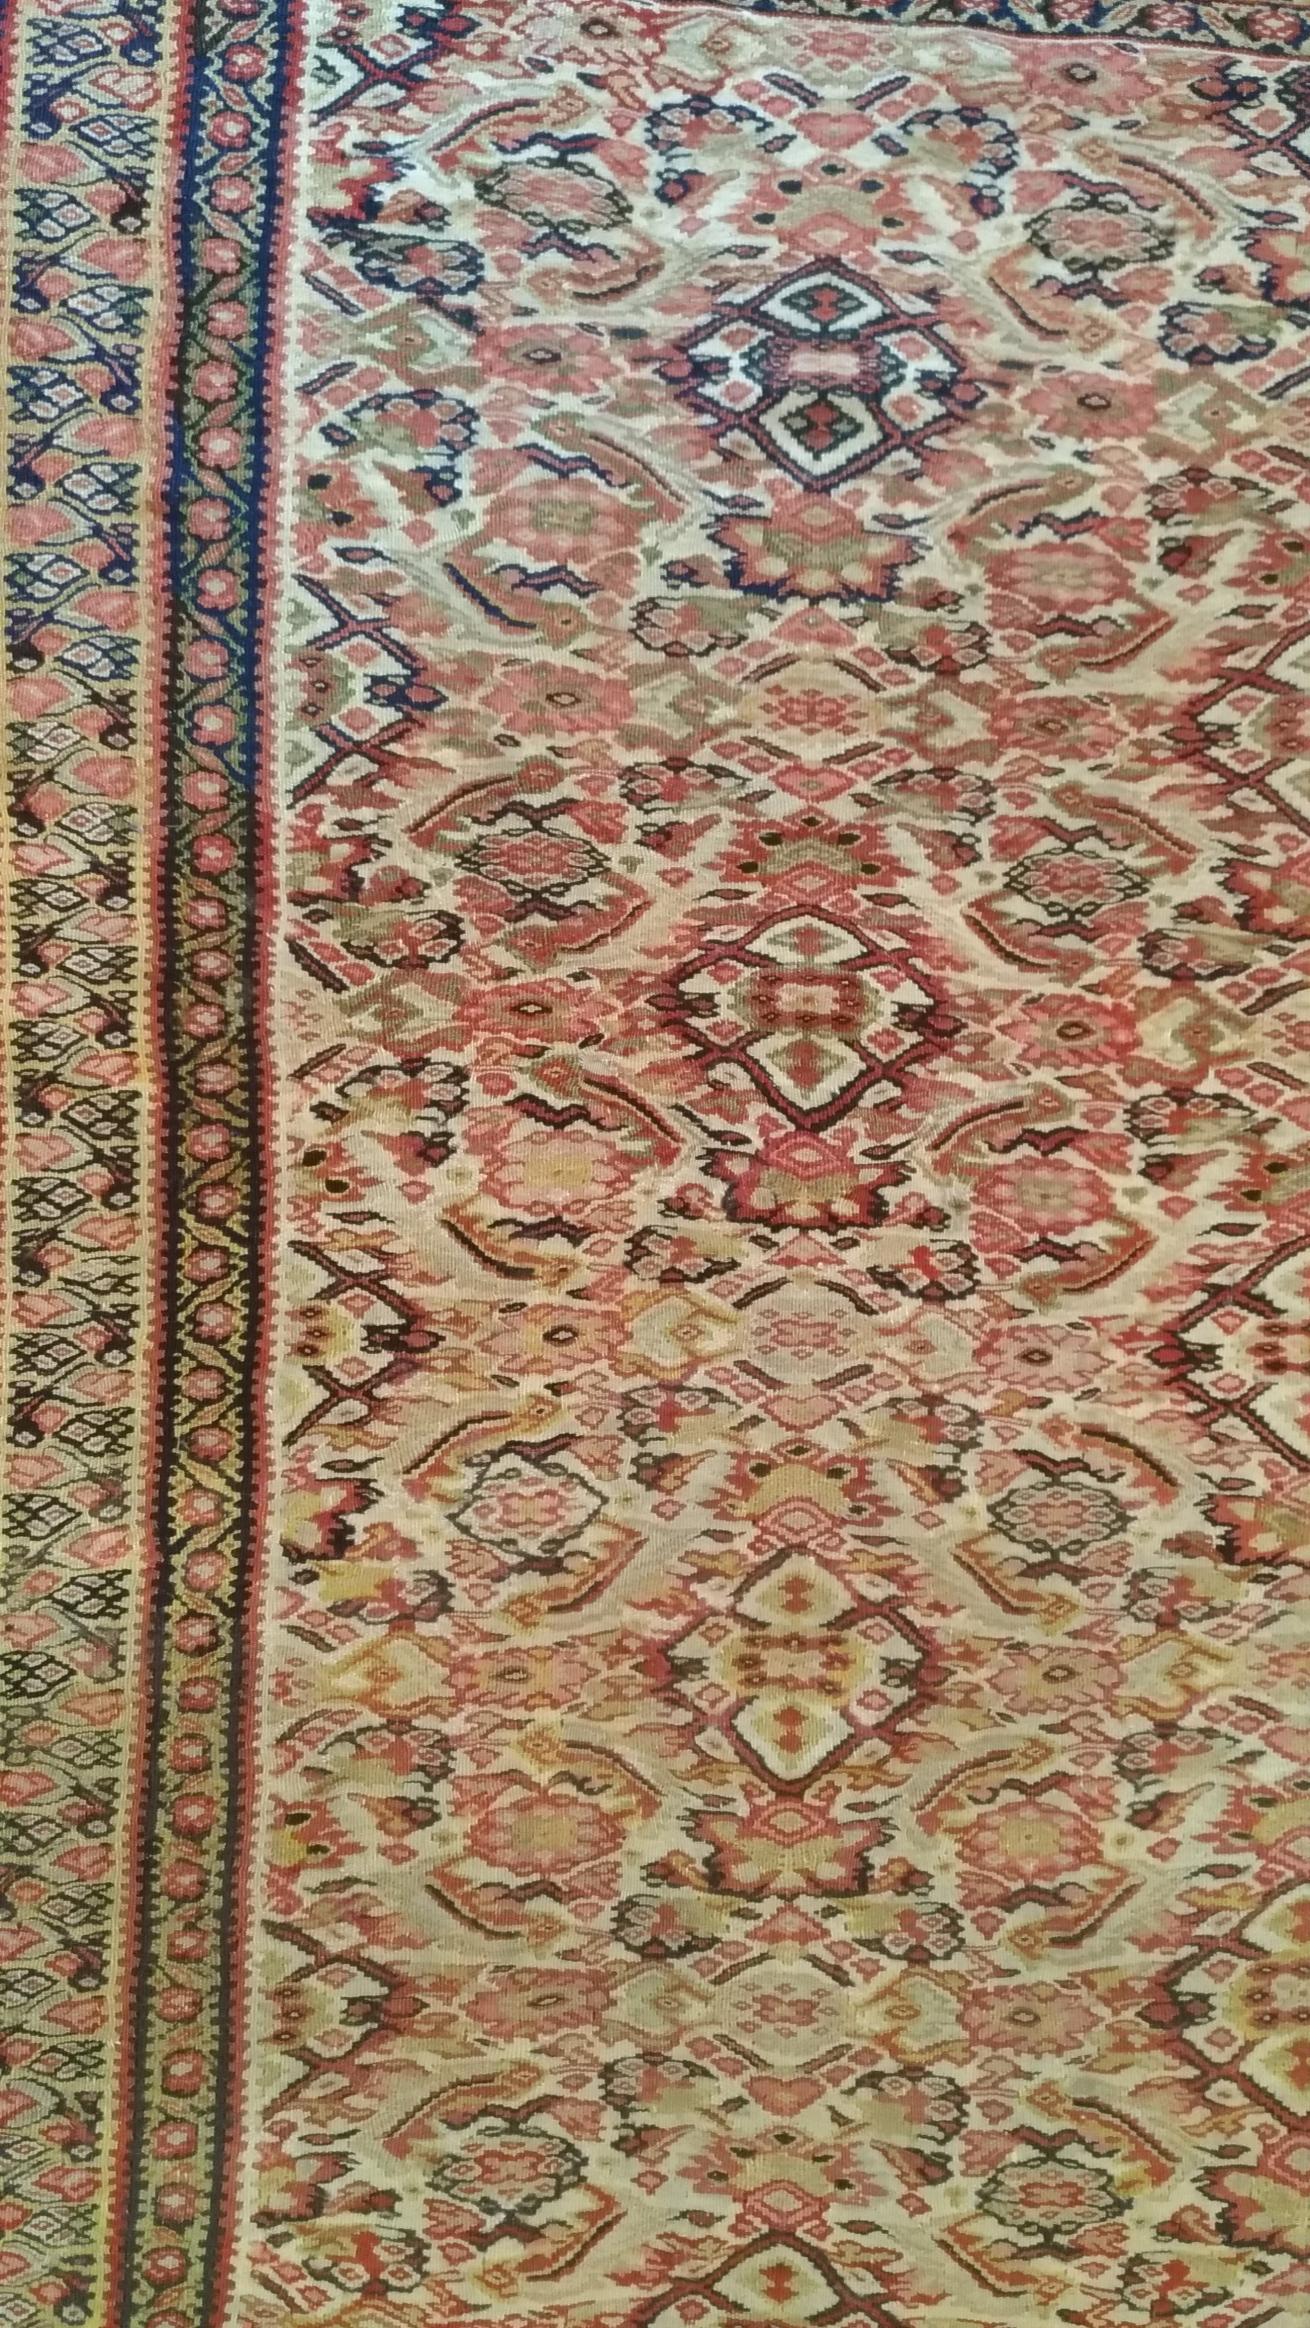 Central Asian 1057 -  Very Beautiful Old Kilim Senneh For Sale